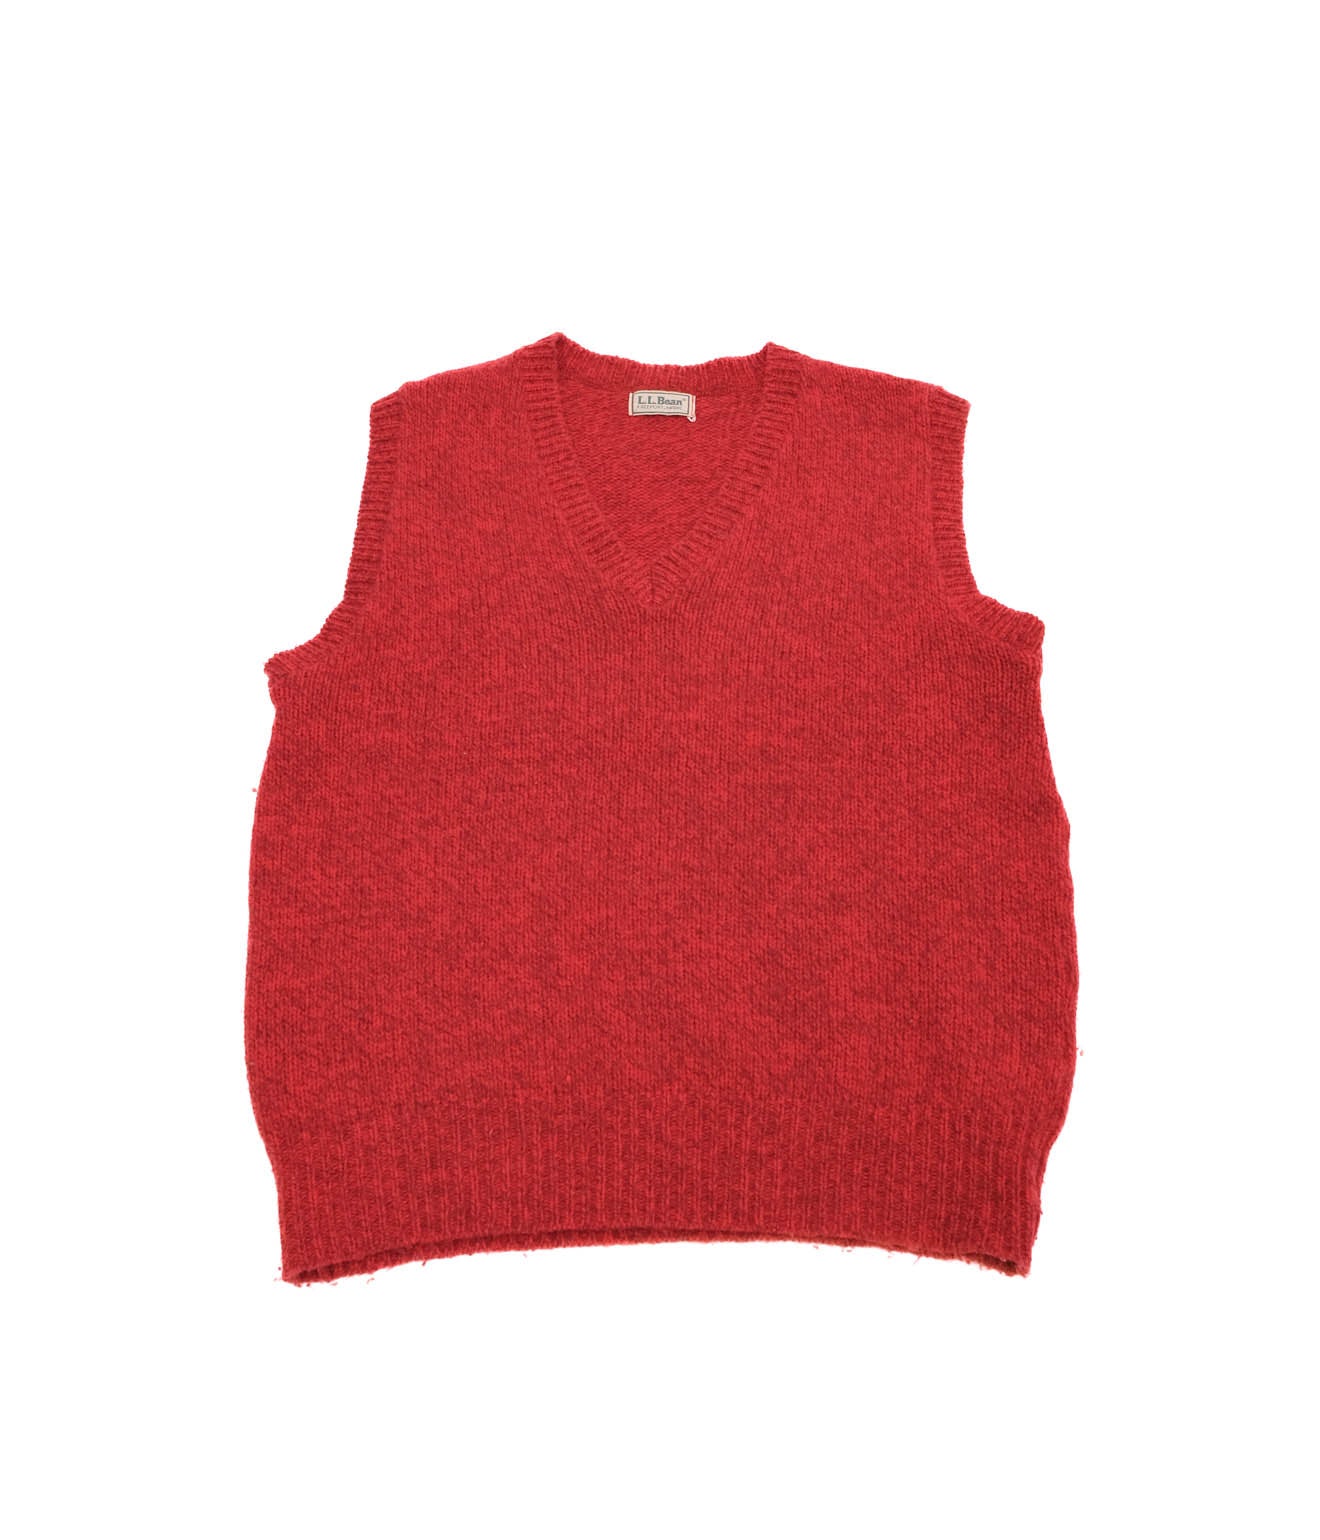 80's LL Bean Knit Vest (Red)